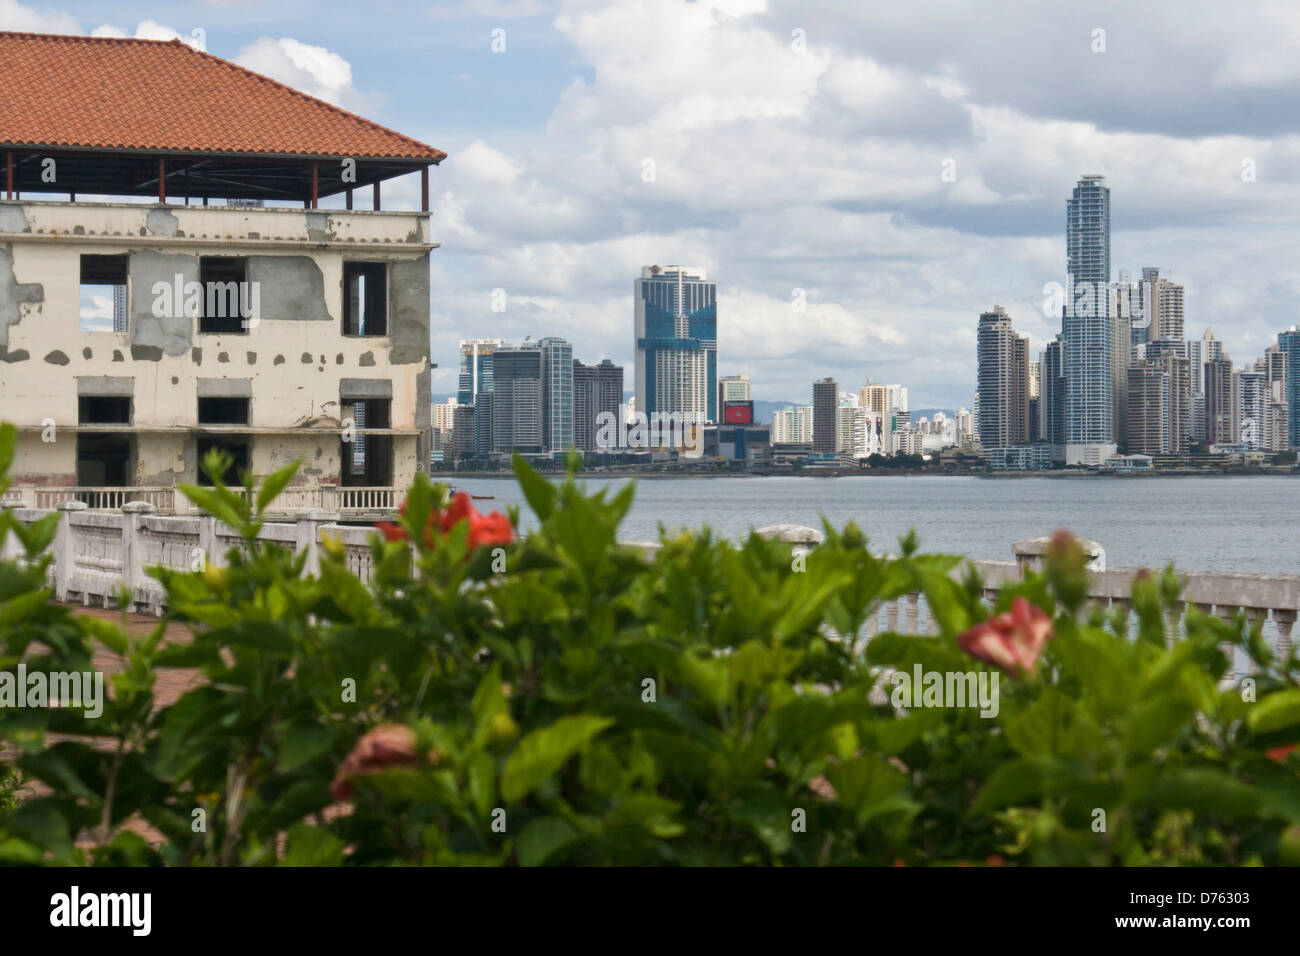 View of spanish colonial architecture and gardens, Casco Viejo District, Panama City Stock Photo